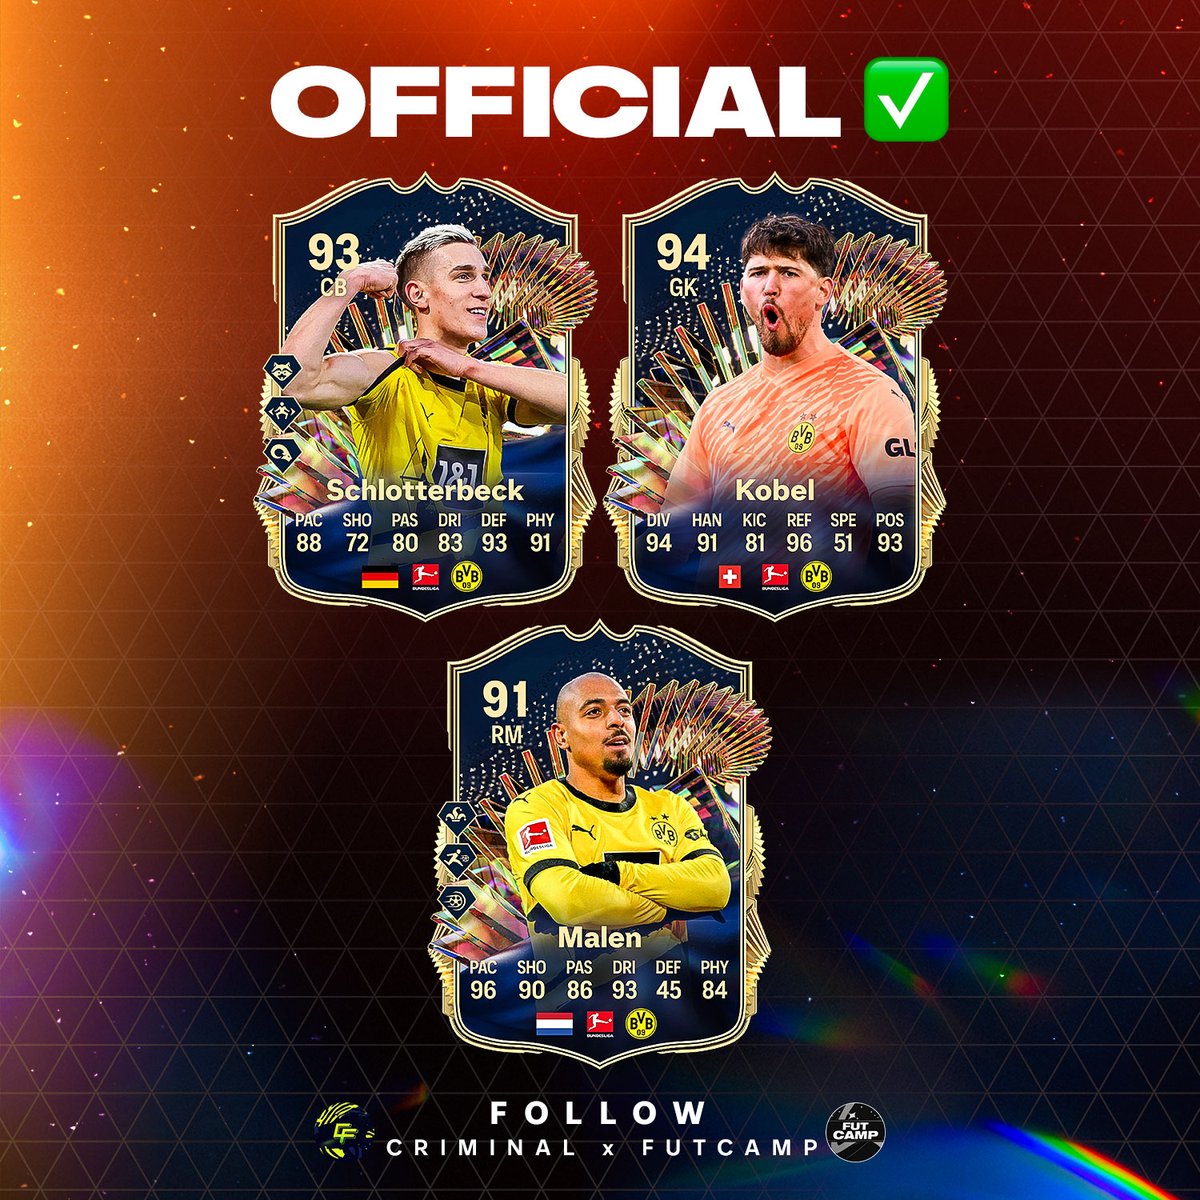 🚨Official 🇩🇪Schlotterbeck🇨🇭Kobel 🇳🇱Malen TOTS Cards ✅ Stats ✅ Dynamic Image ✅ Playstyle+ ✅ Follow @Criminal__x and @fut_camp 🔥 #FC24